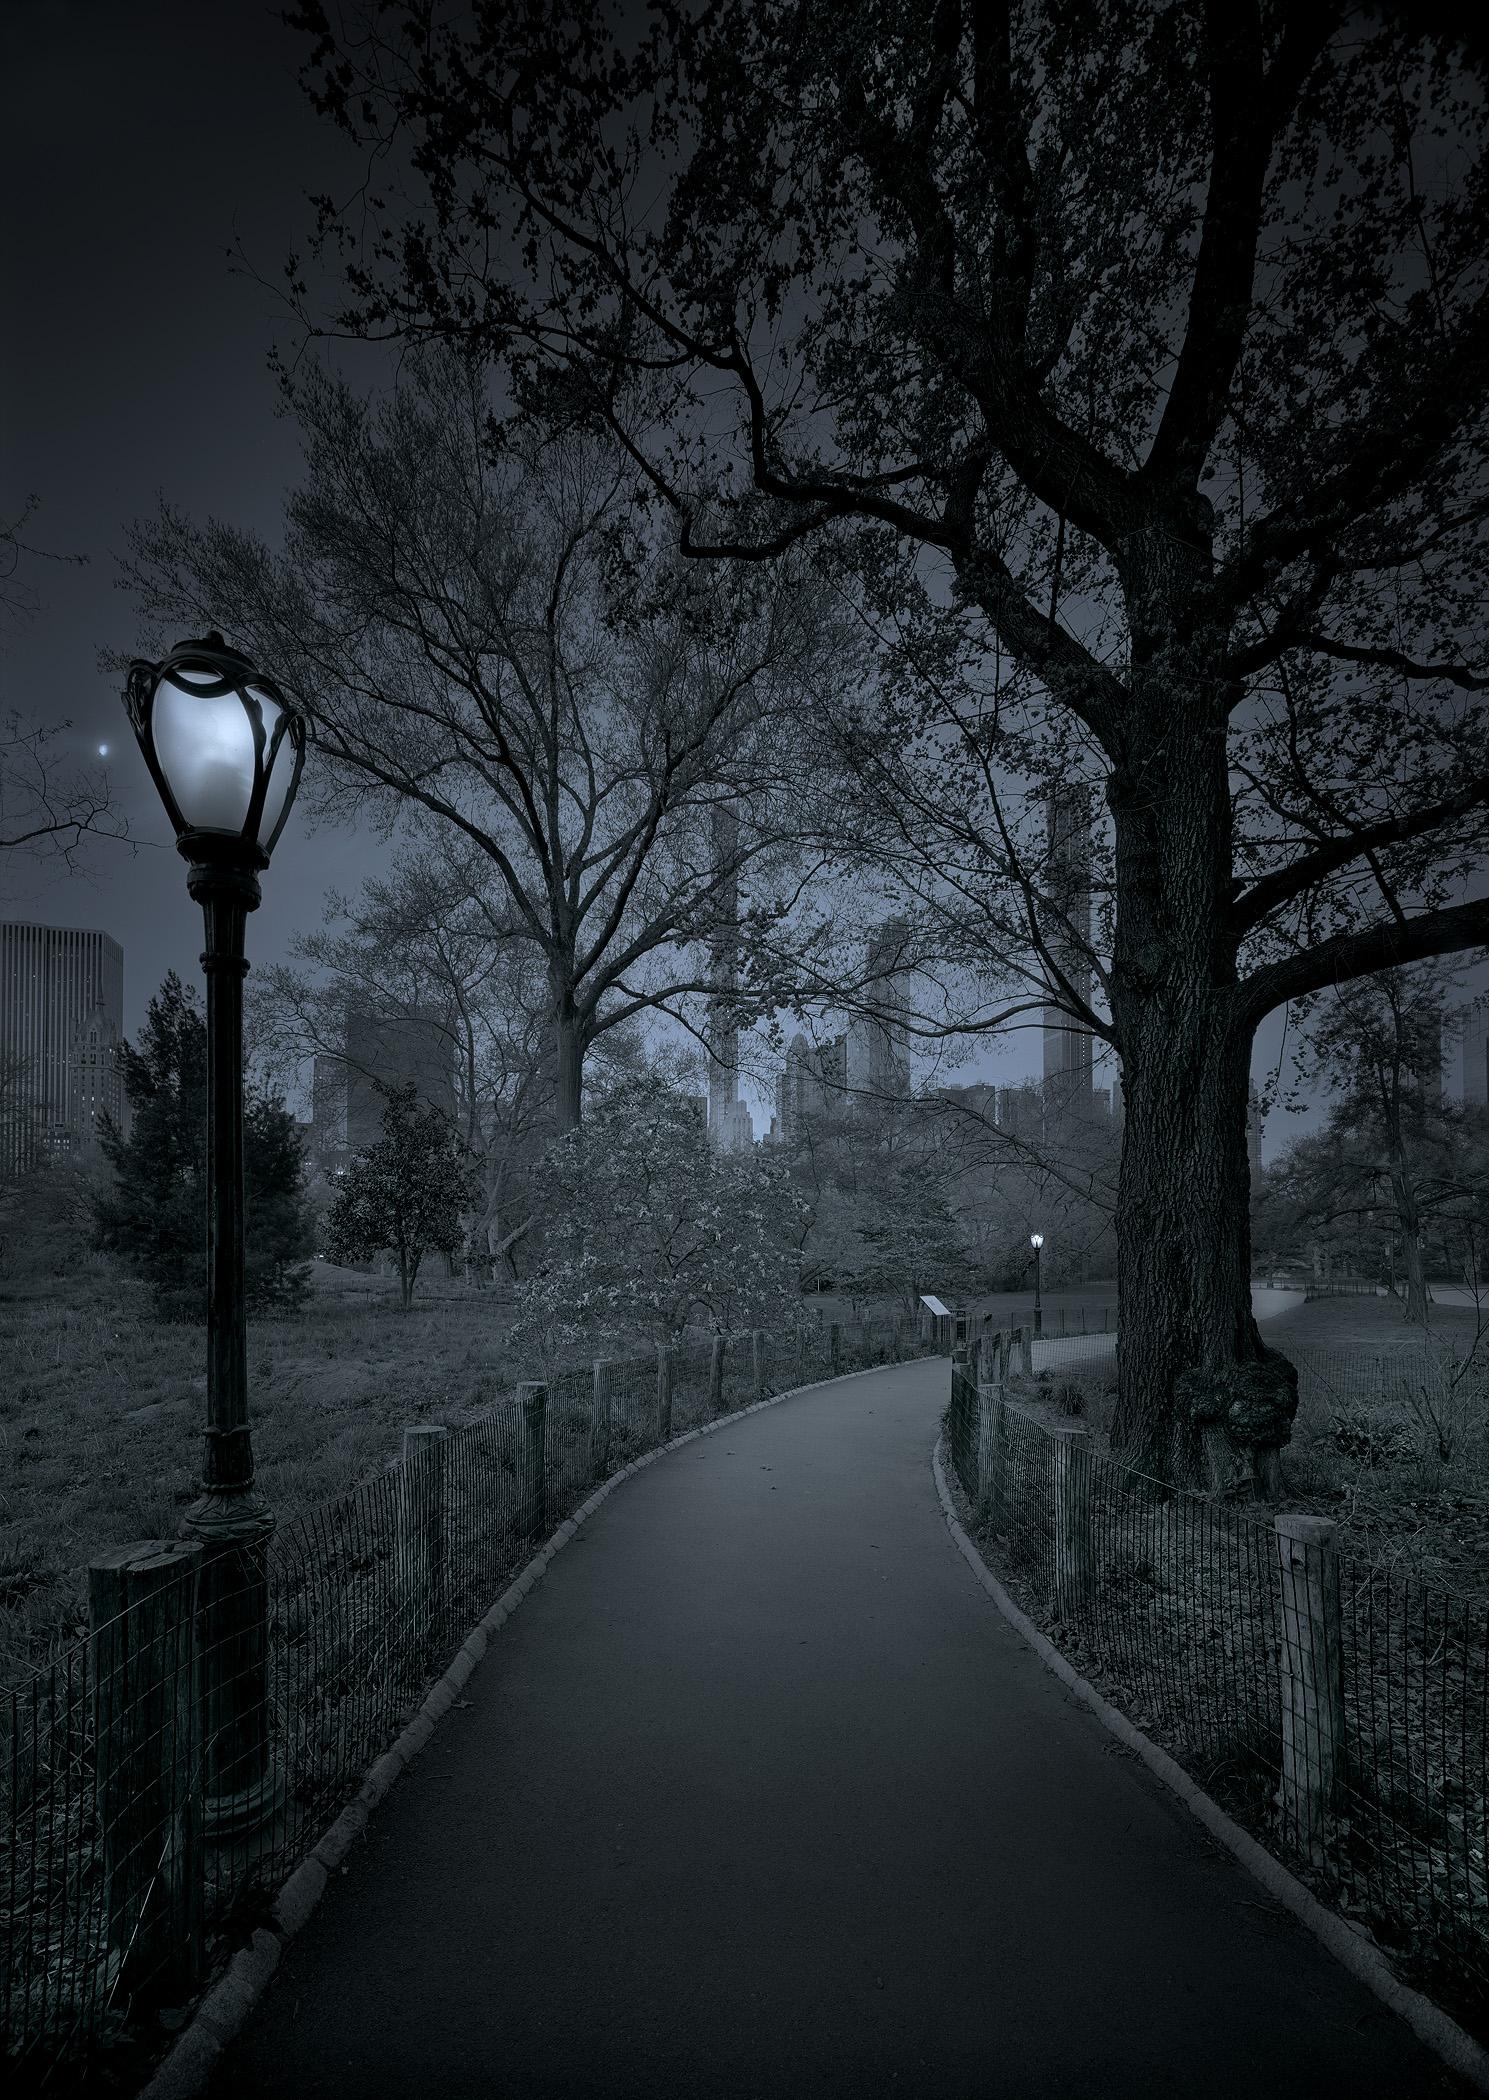 Michael Massaia, Second Spring, Three Quarter Moon, Central Park, New York City, Image size approx: 22 x 28", Matted: 28 x 36", Triple gold toned gelatin silver print mounted to archival museum board and matted, Edition of 20, Signed and editioned